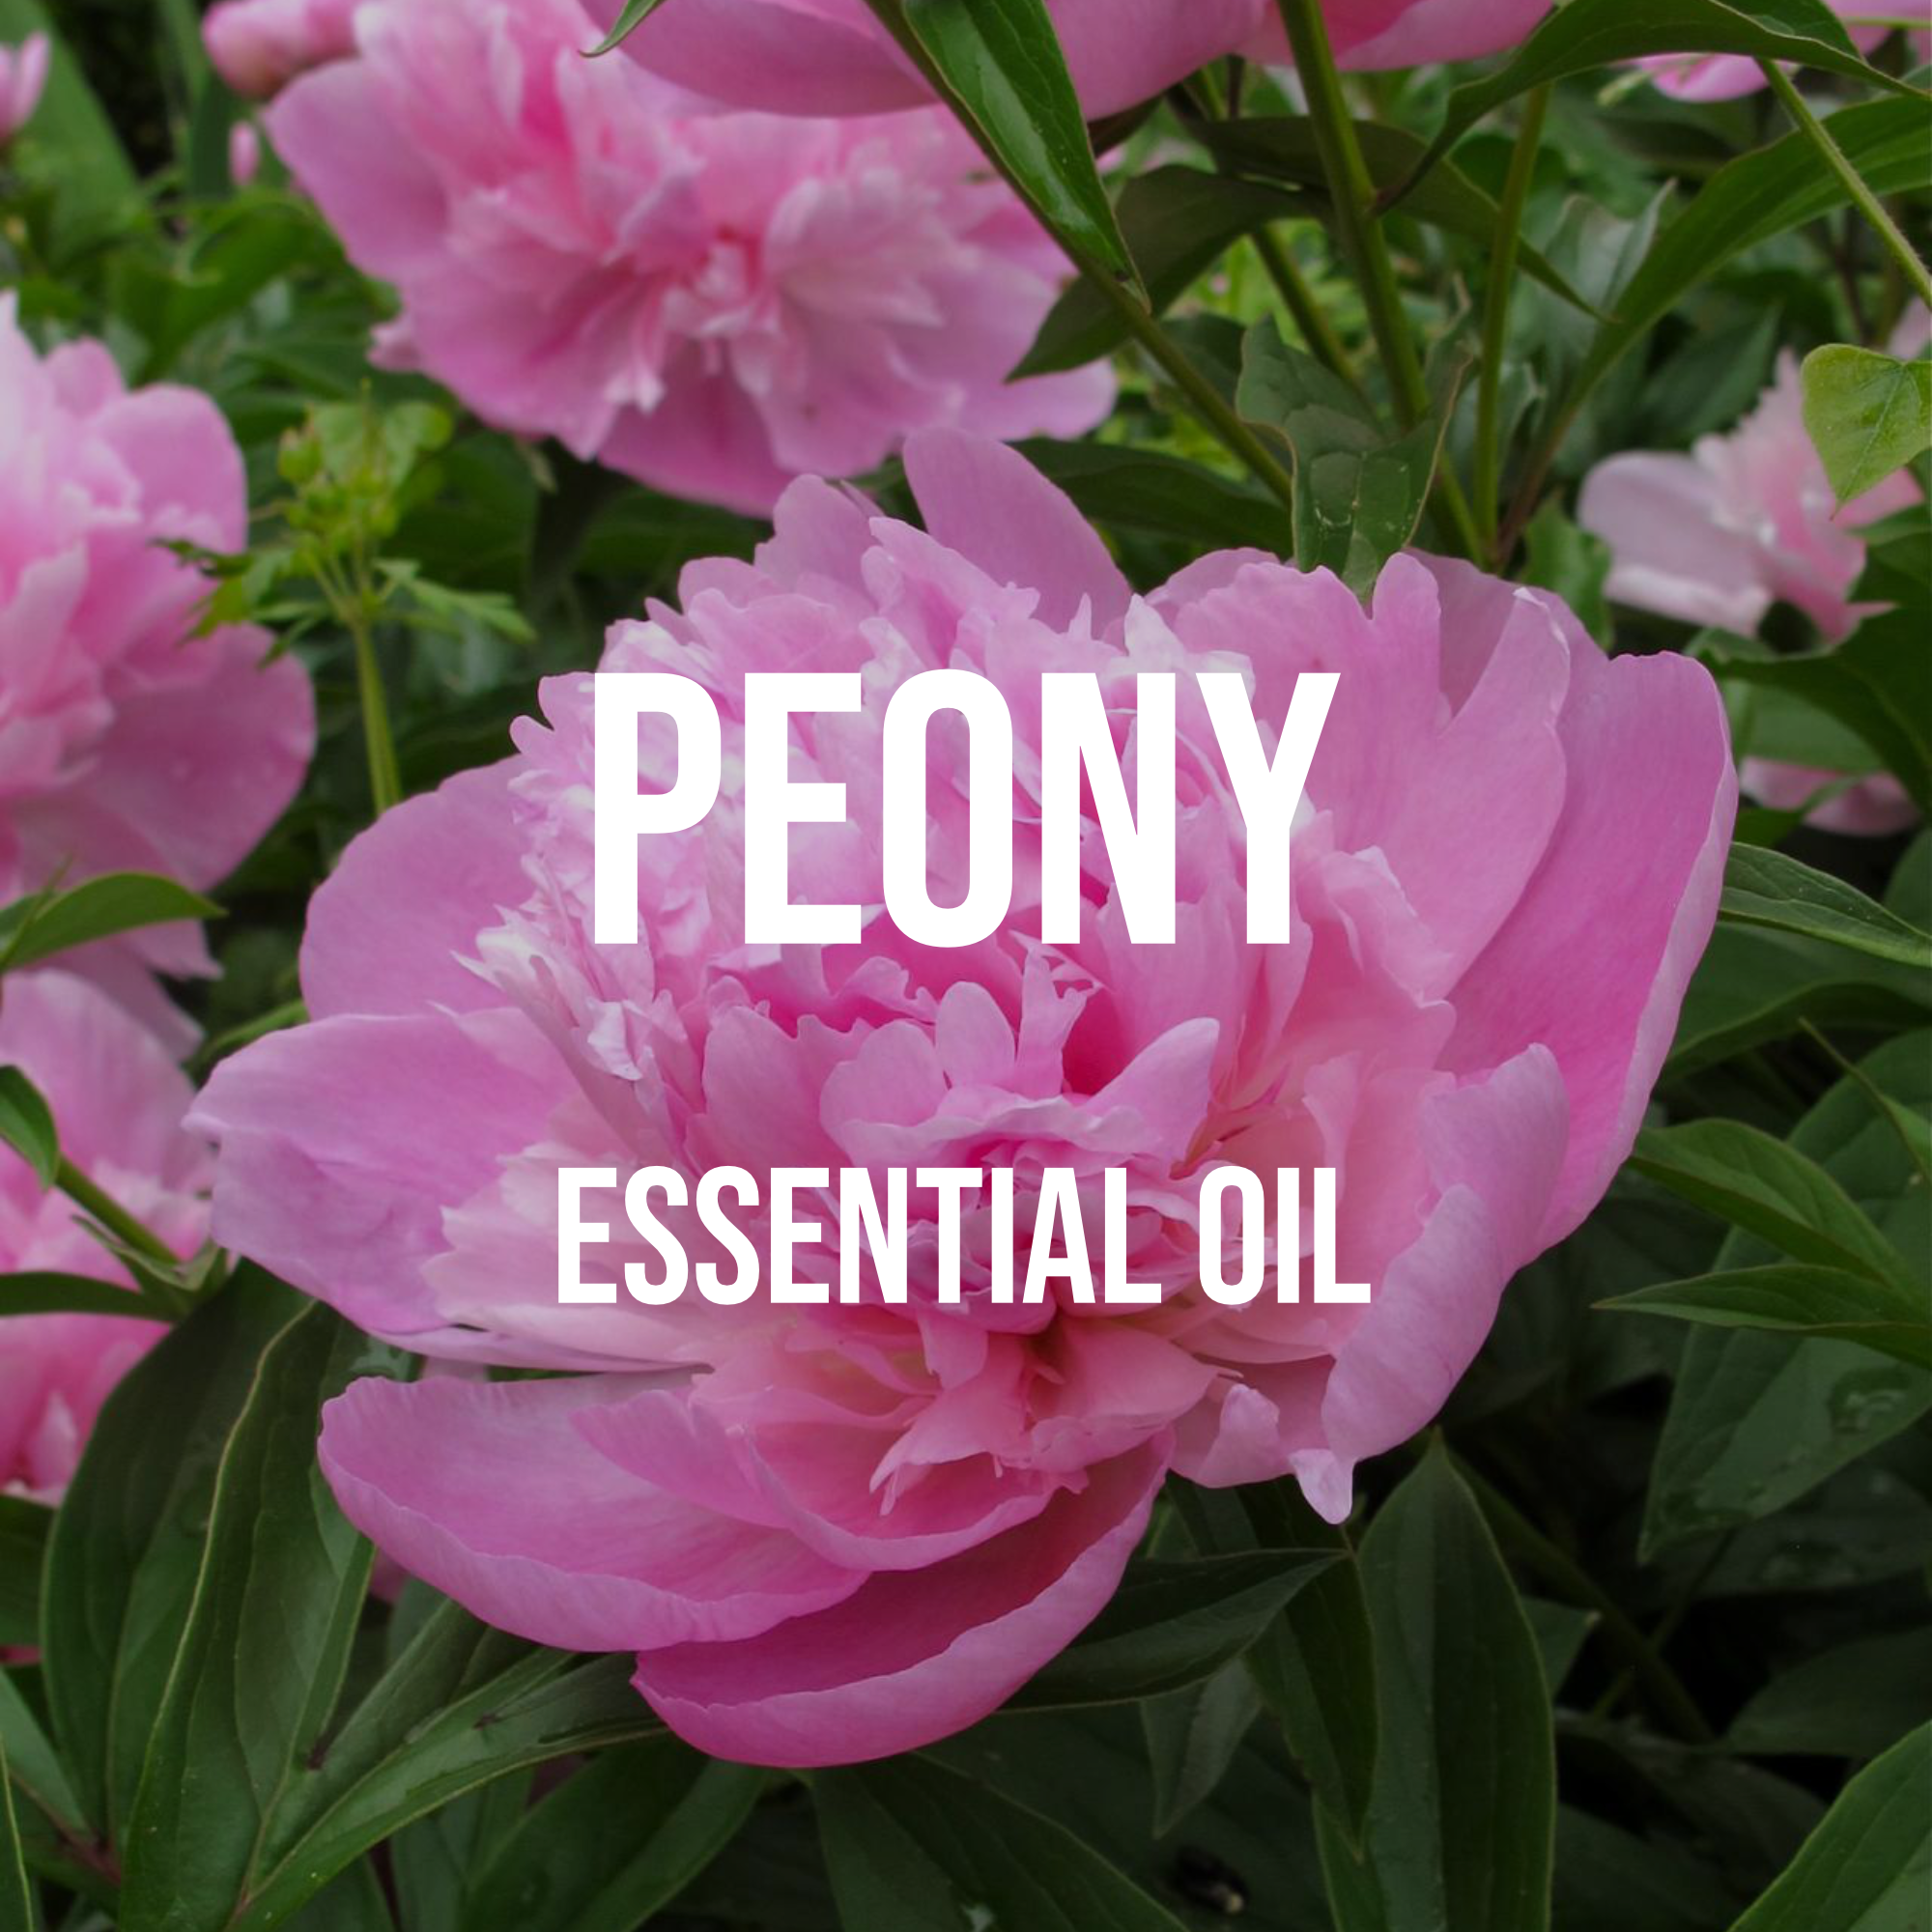 A Bottle Of Peony Essential Oil With White Peony Flowers Stock Photo -  Download Image Now - iStock